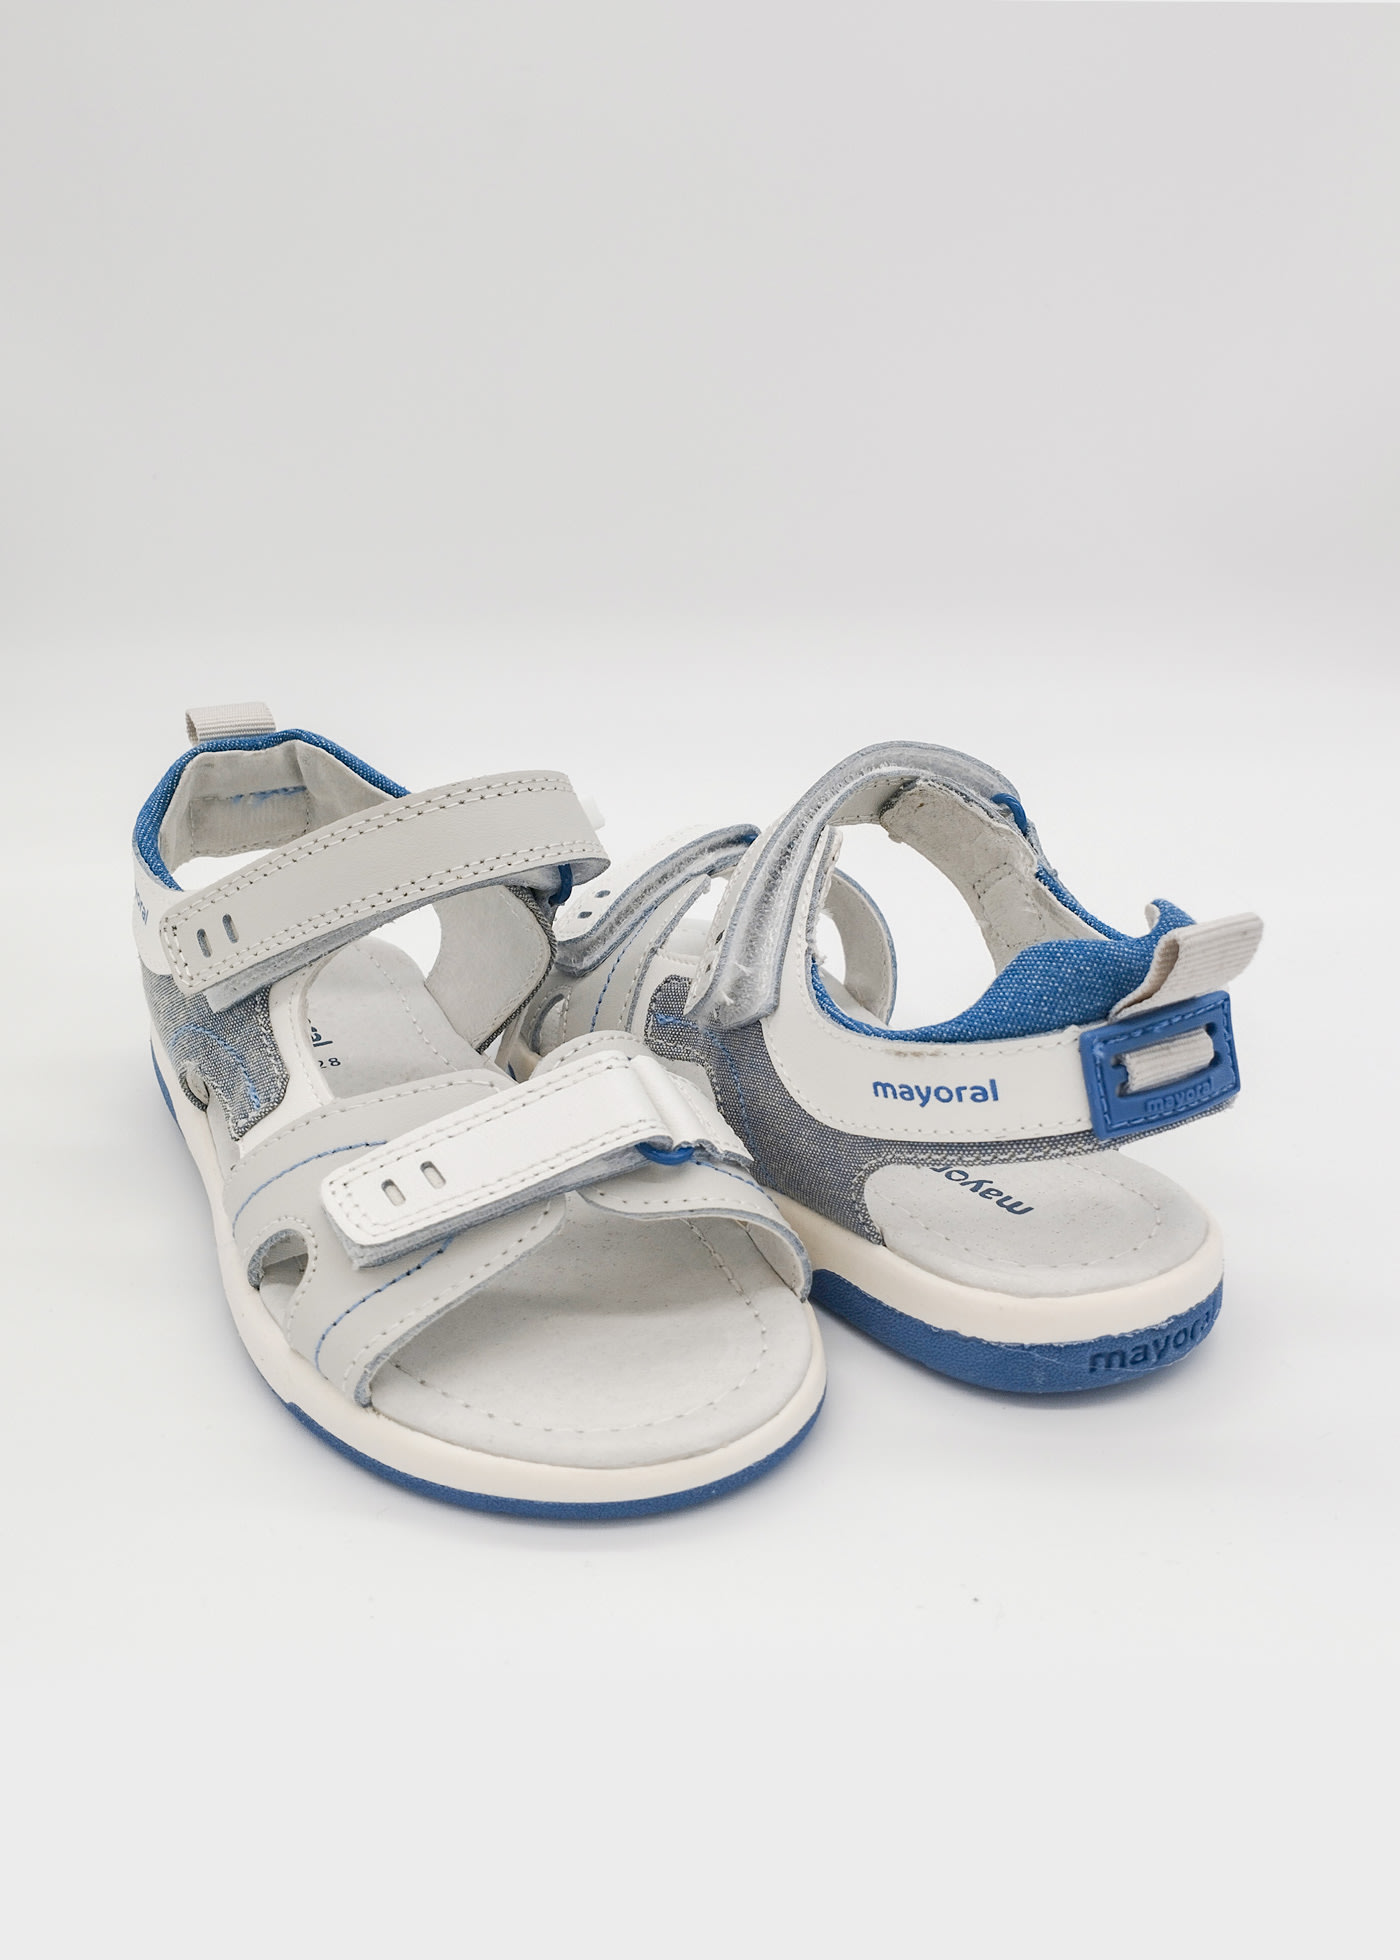 Boy Sandals Sustainable Leather